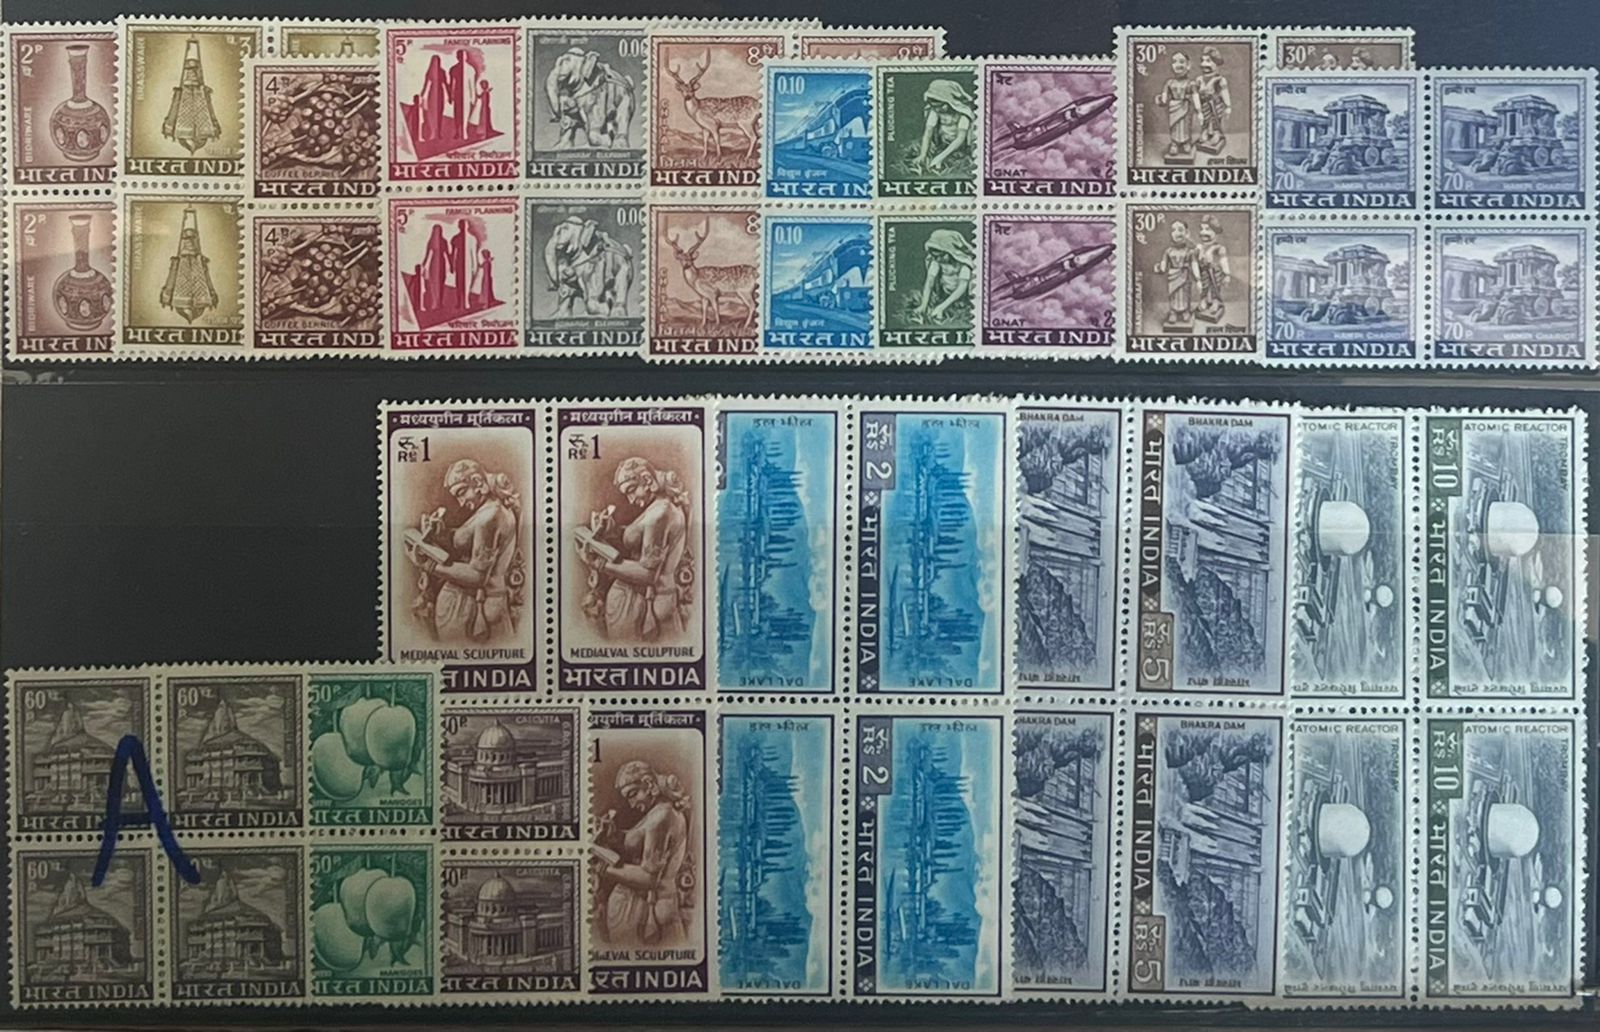 India 1957 4th Definitives Series  Complete Set in Blocks of 4 MNH